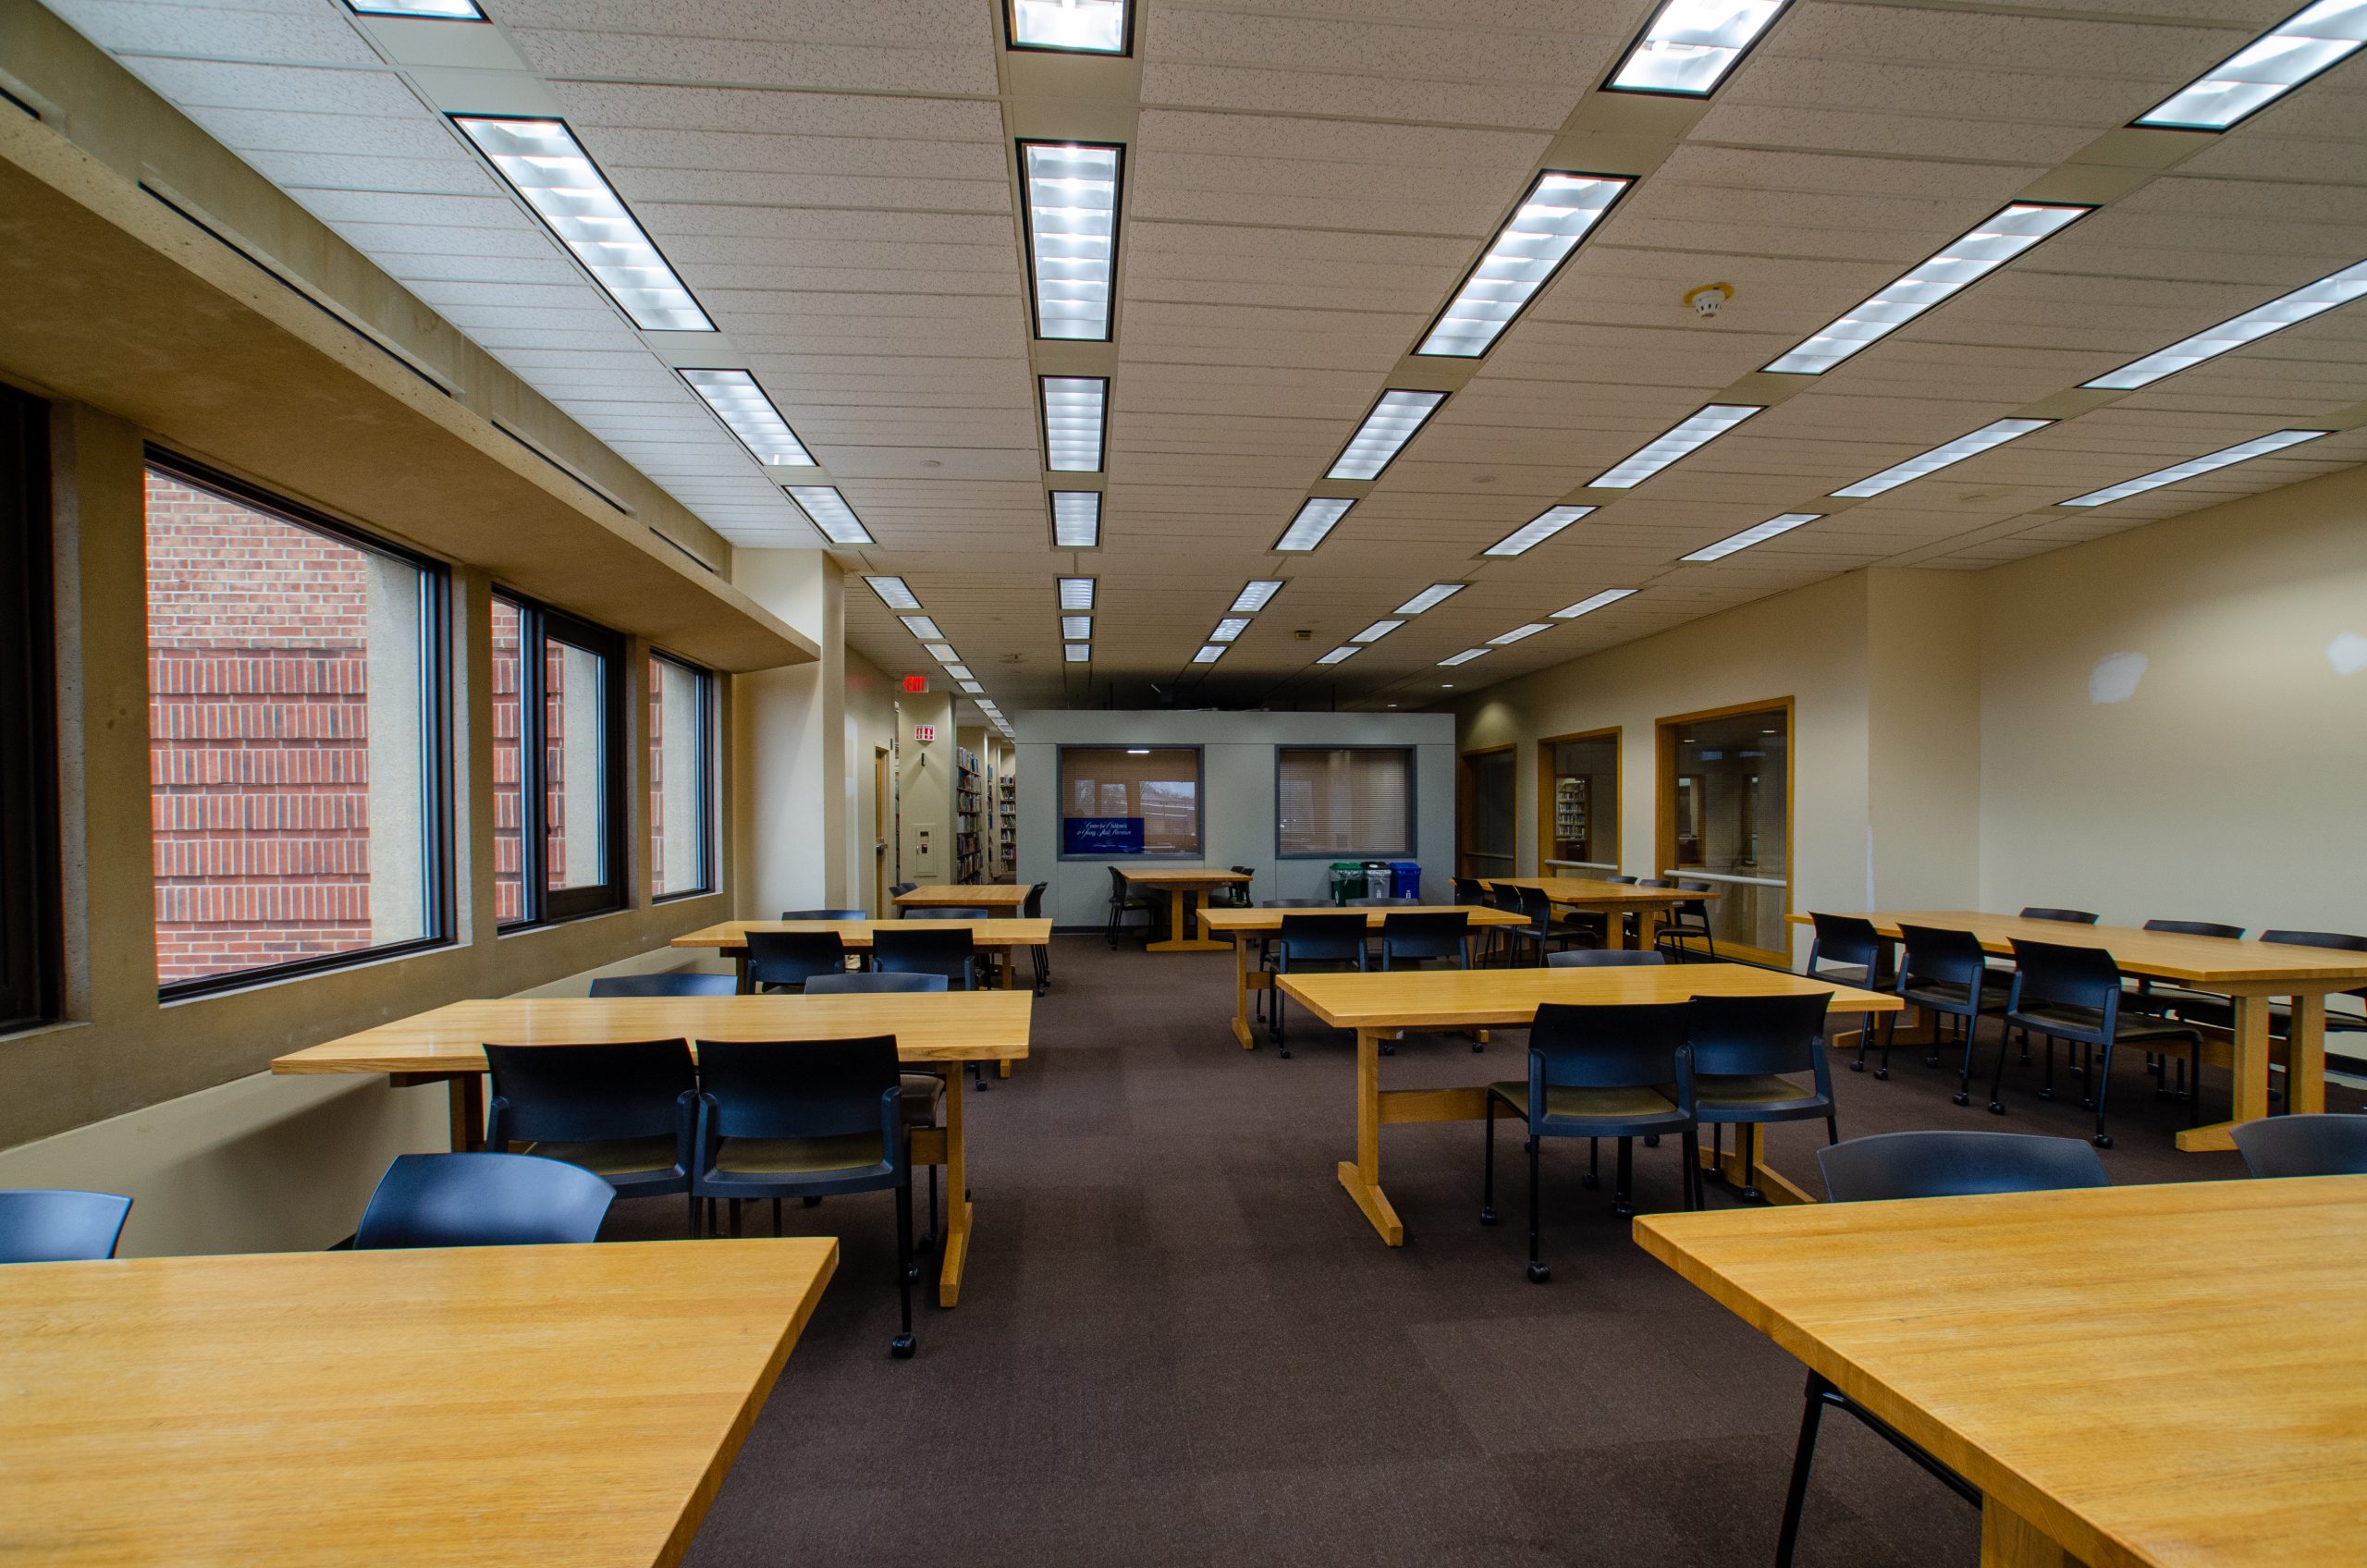 group study tables at hodges library ut knoxville